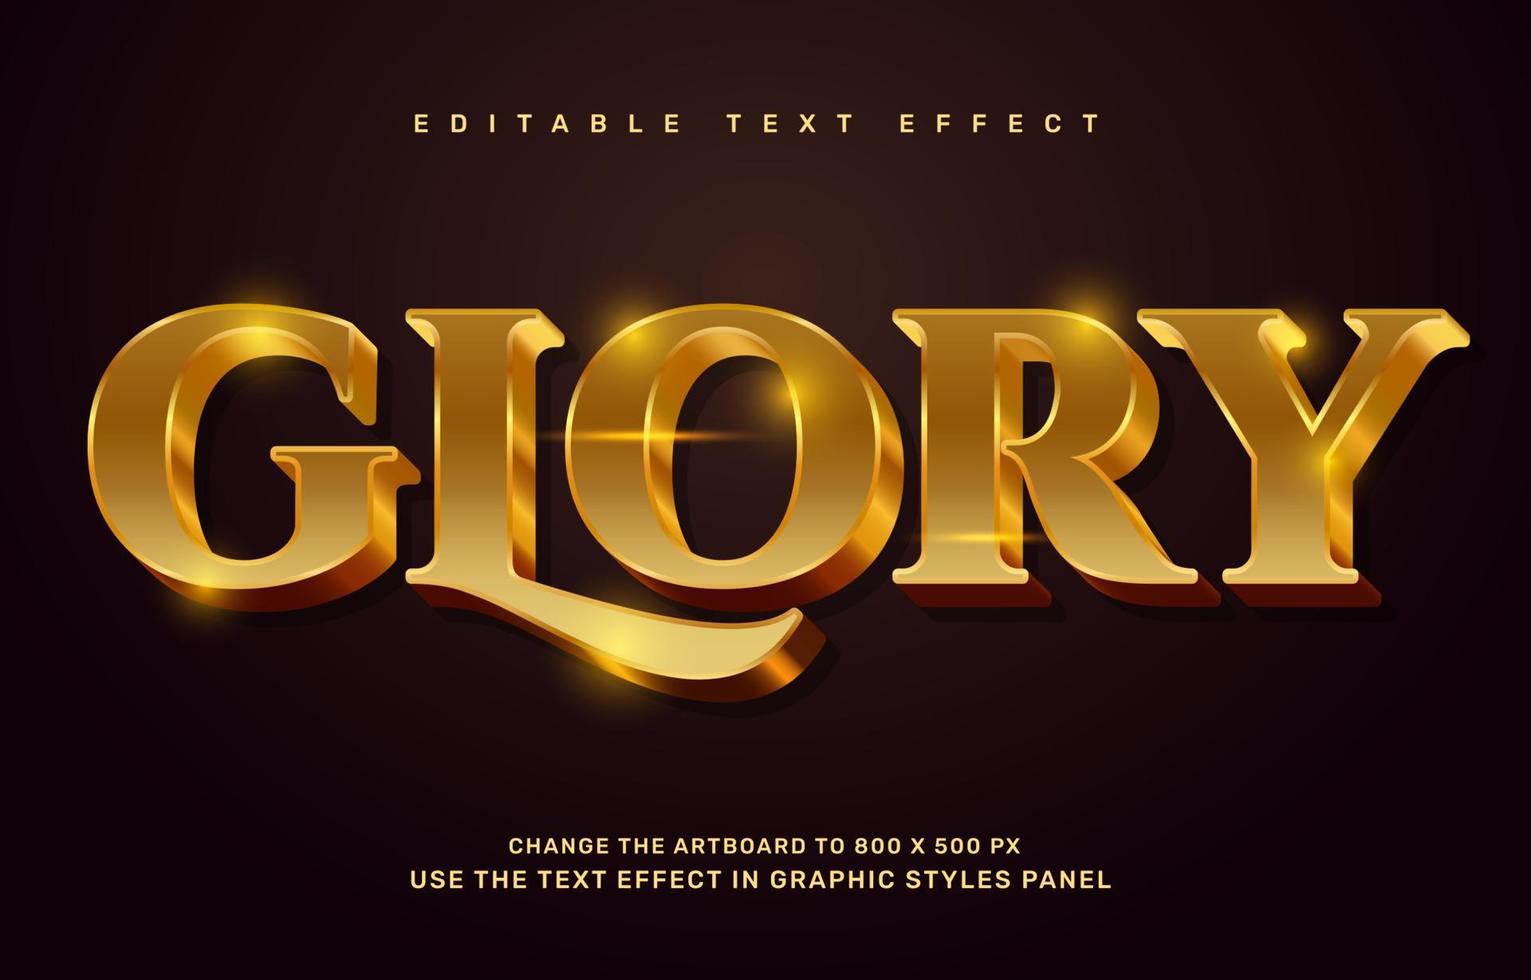 Gold Royal text effect vector